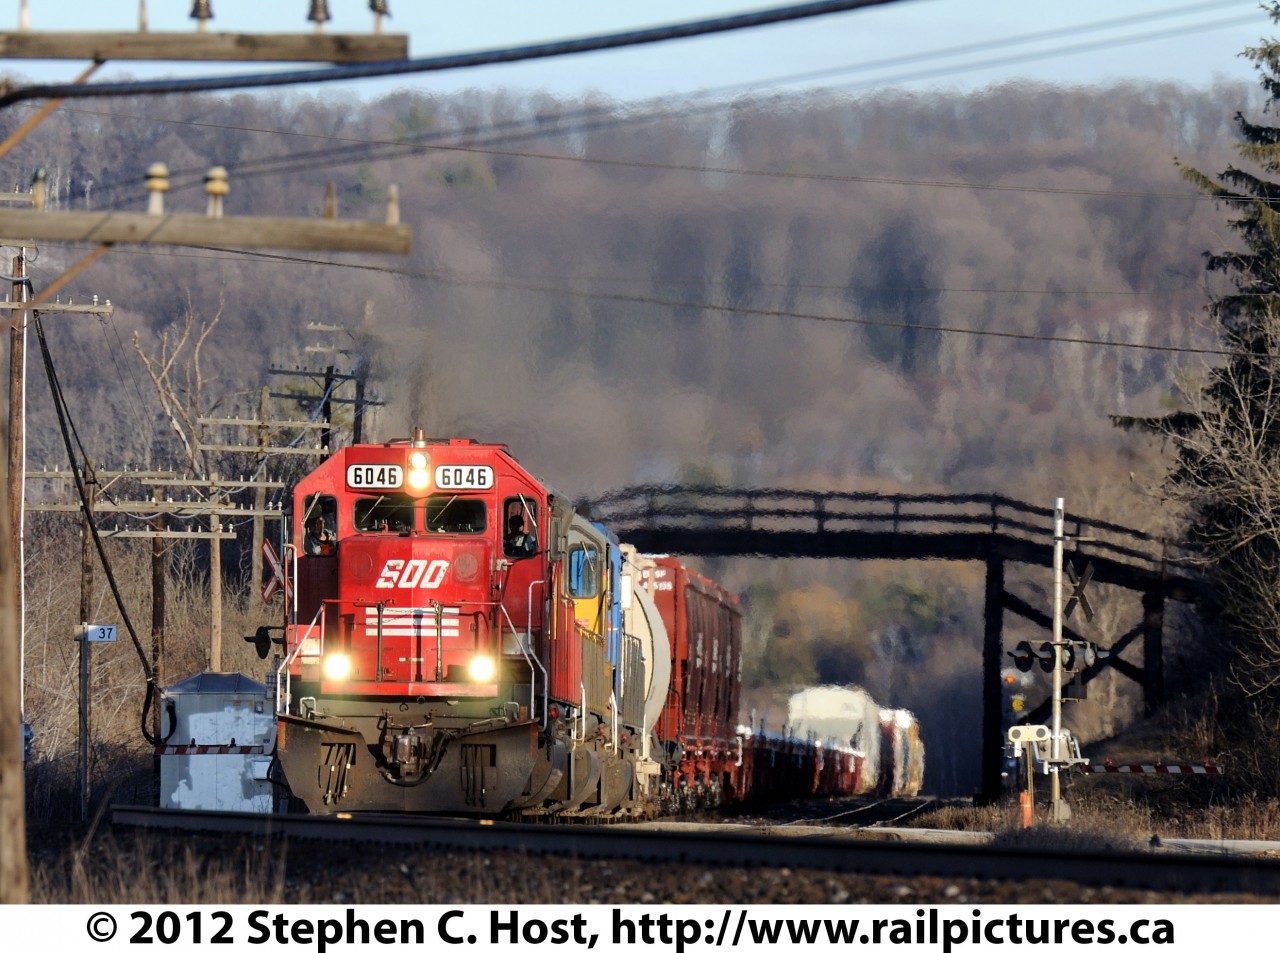 CP 245 with SOO 6046 West is about to crest the Niagara Escarpment at Campbellville